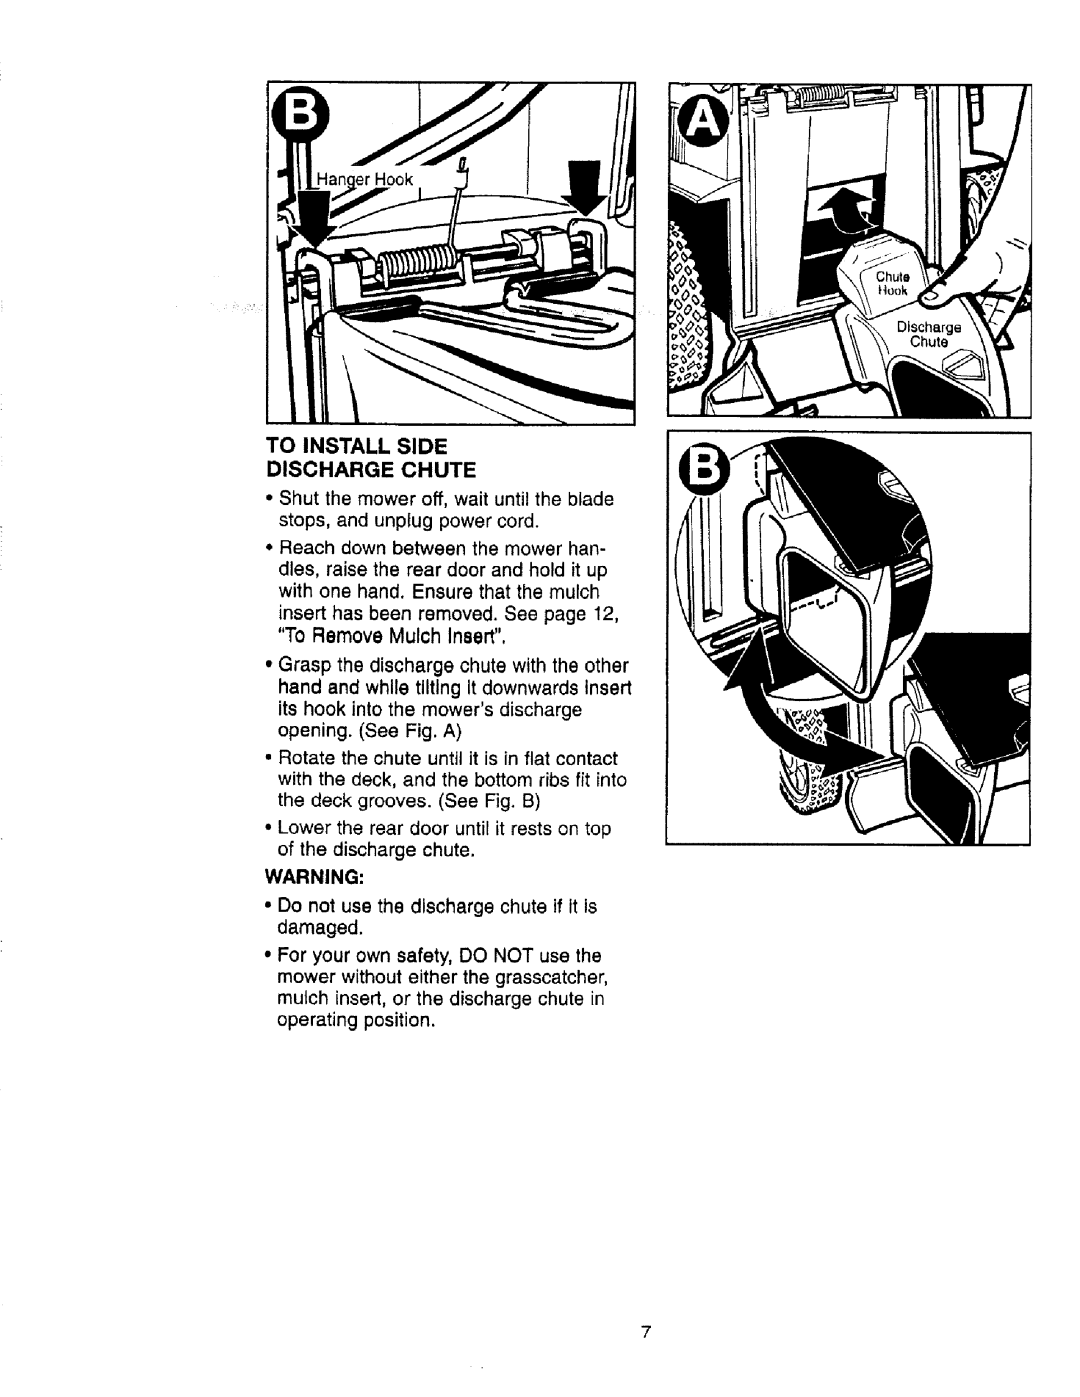 Craftsman 900.370520 manual To Install Side Discharge Chute 